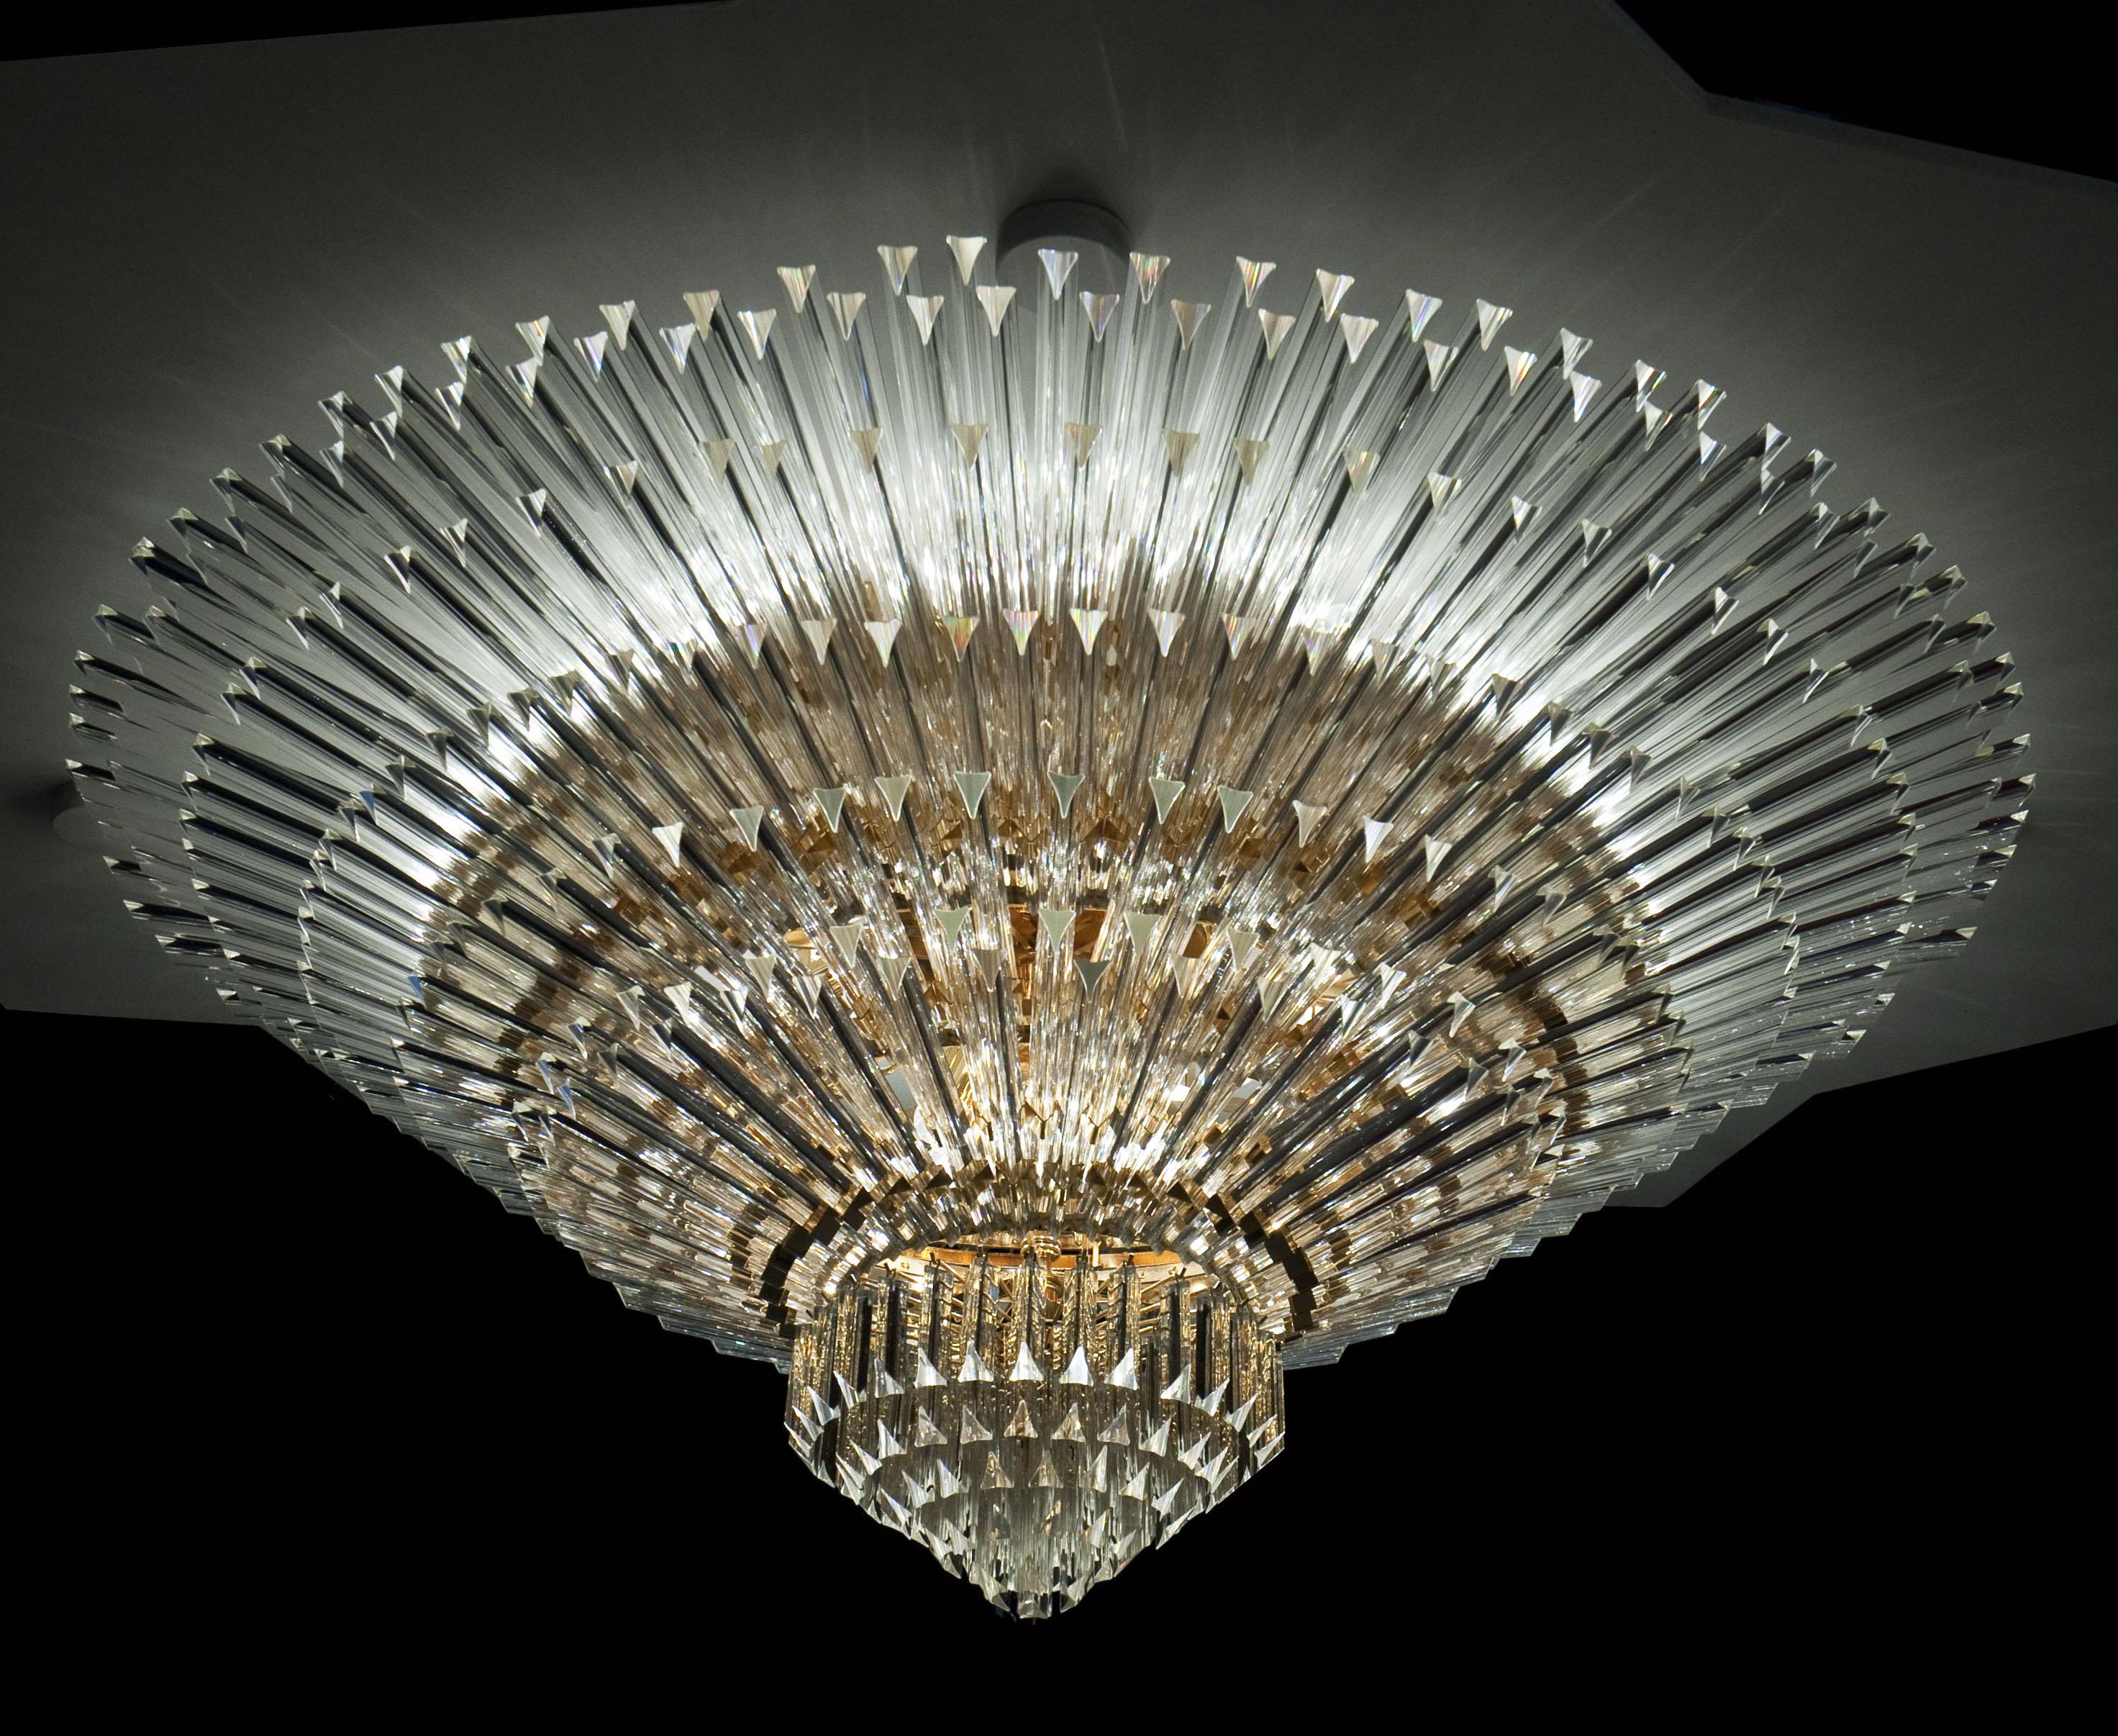 Spectacular and large ceiling light with a myriad of handmade Murano glass 